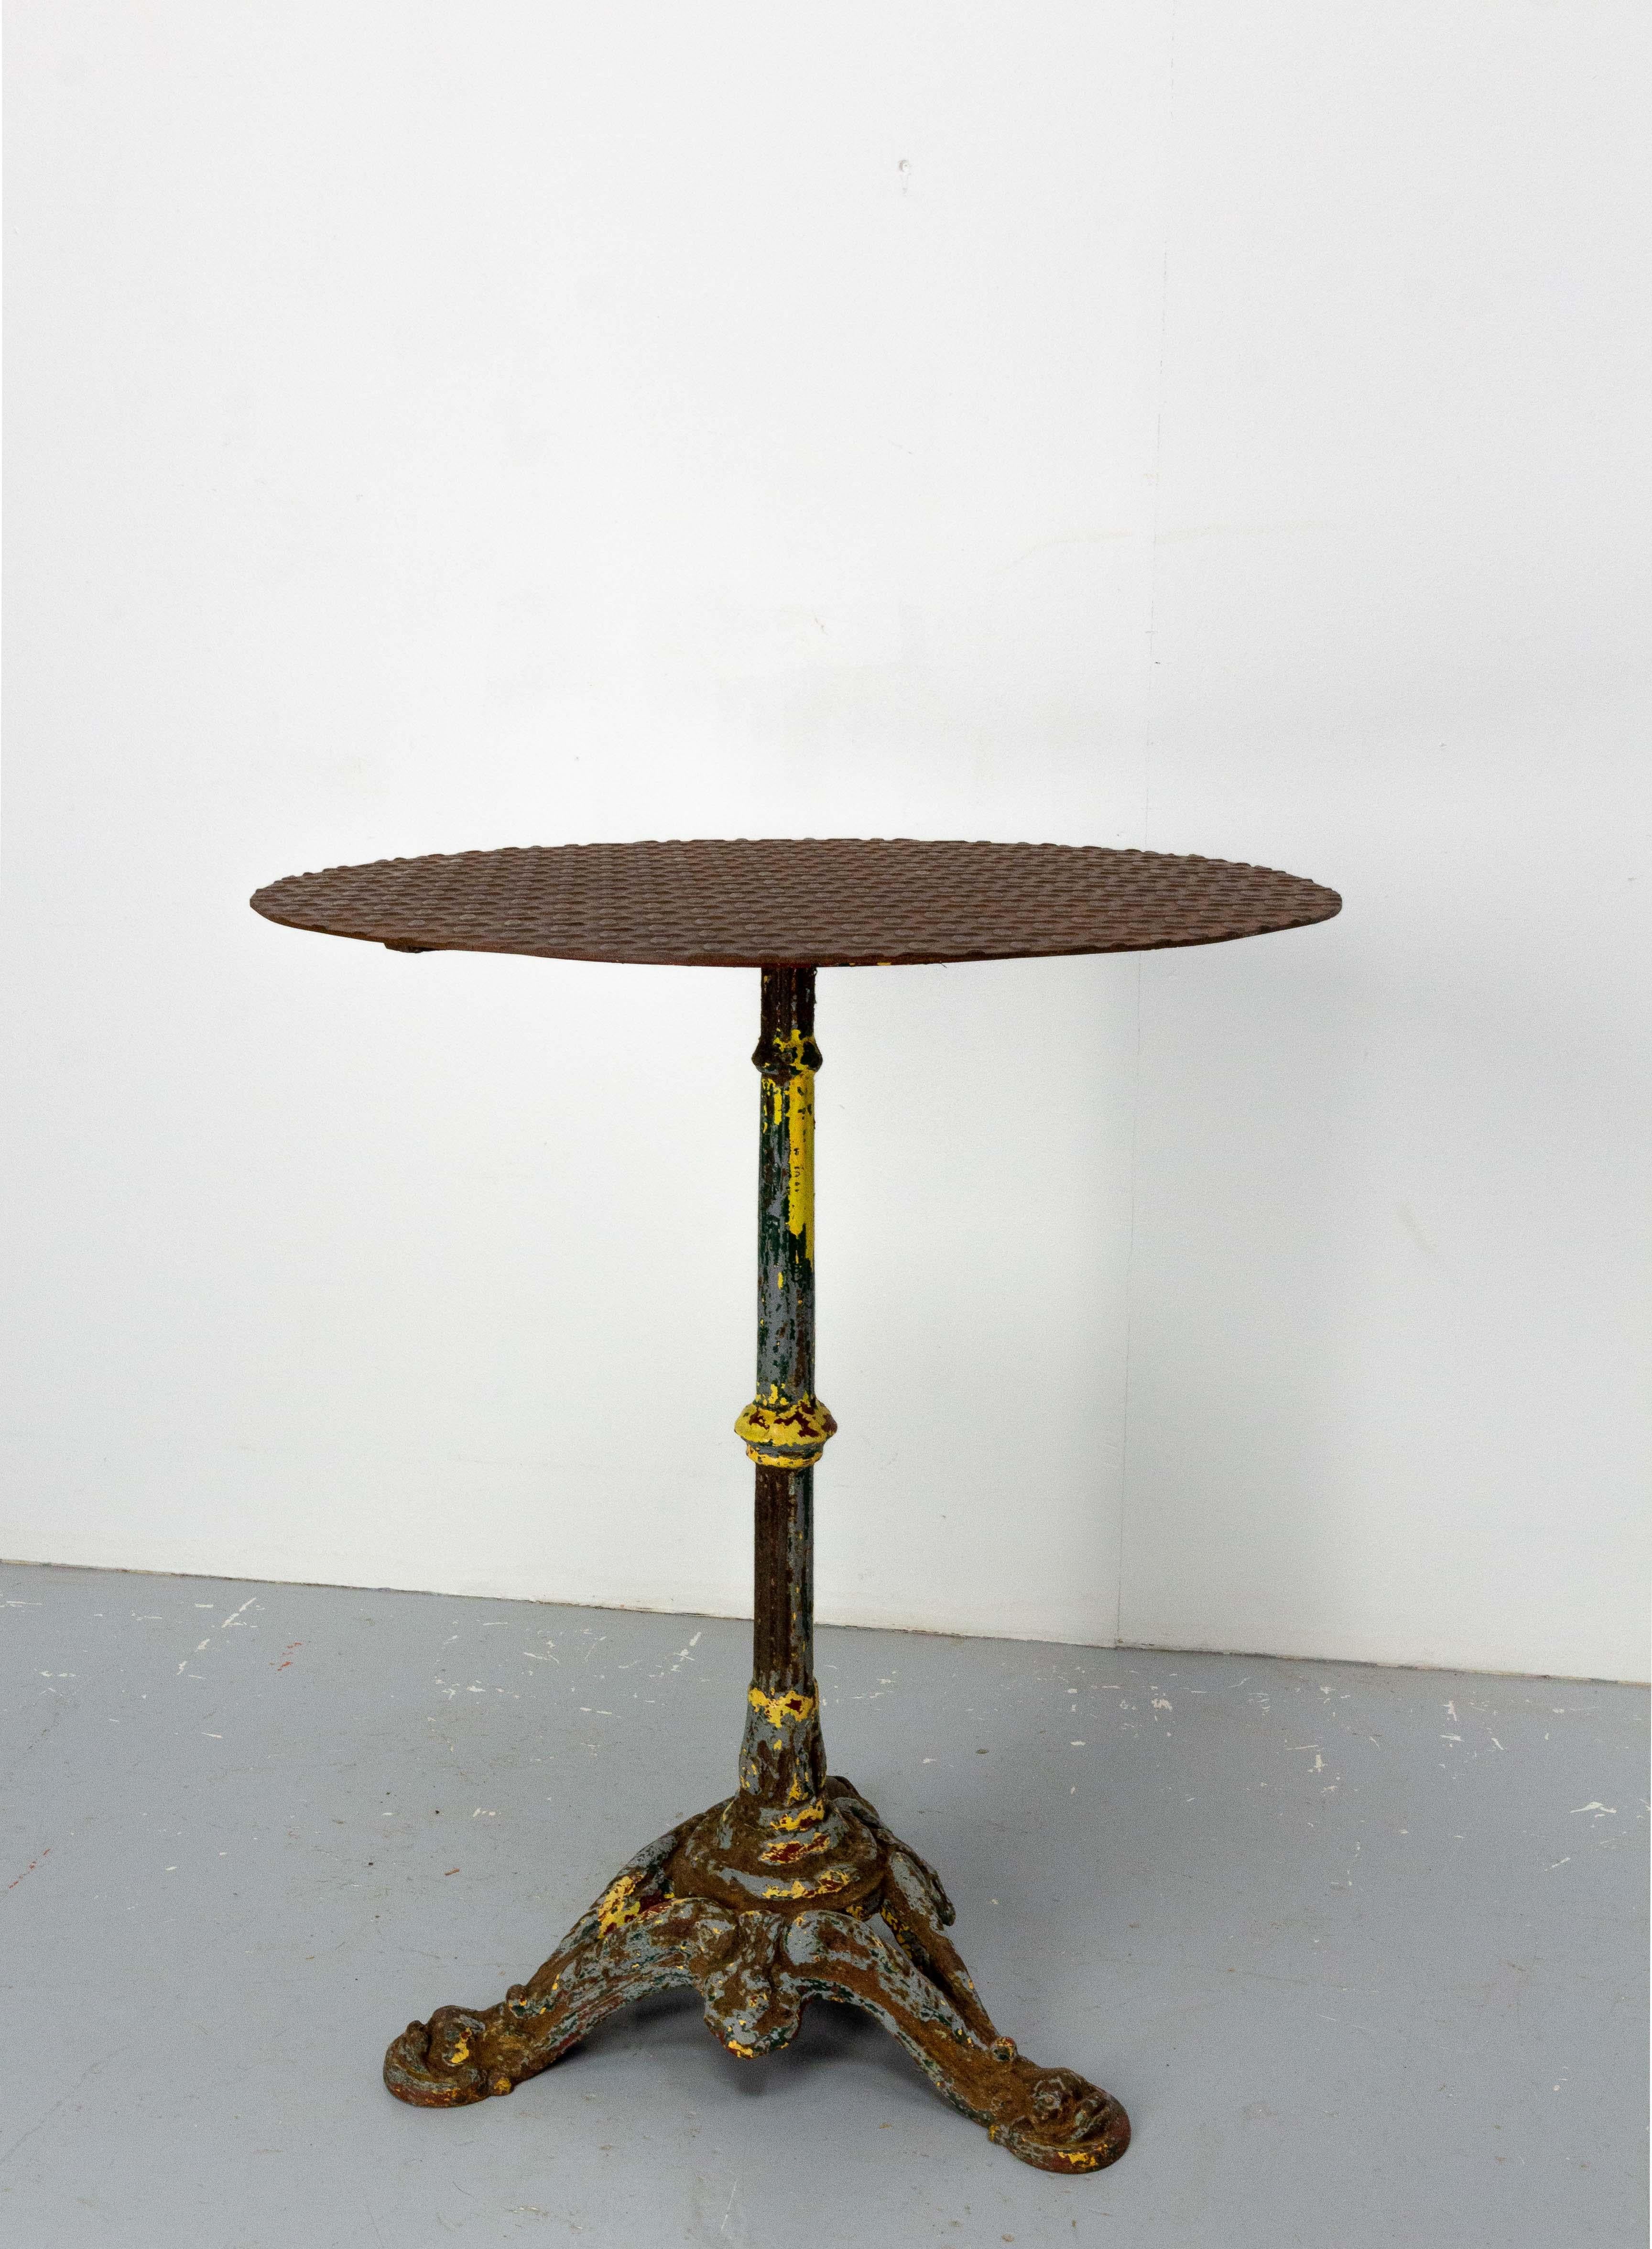 Bistro tables with metal top and wrought iron foot, French, late 19th century
This table is a composition of the seventies years made with a authentic bistro table foot from Paris and an industrial metal plate.
Good antique condition with general